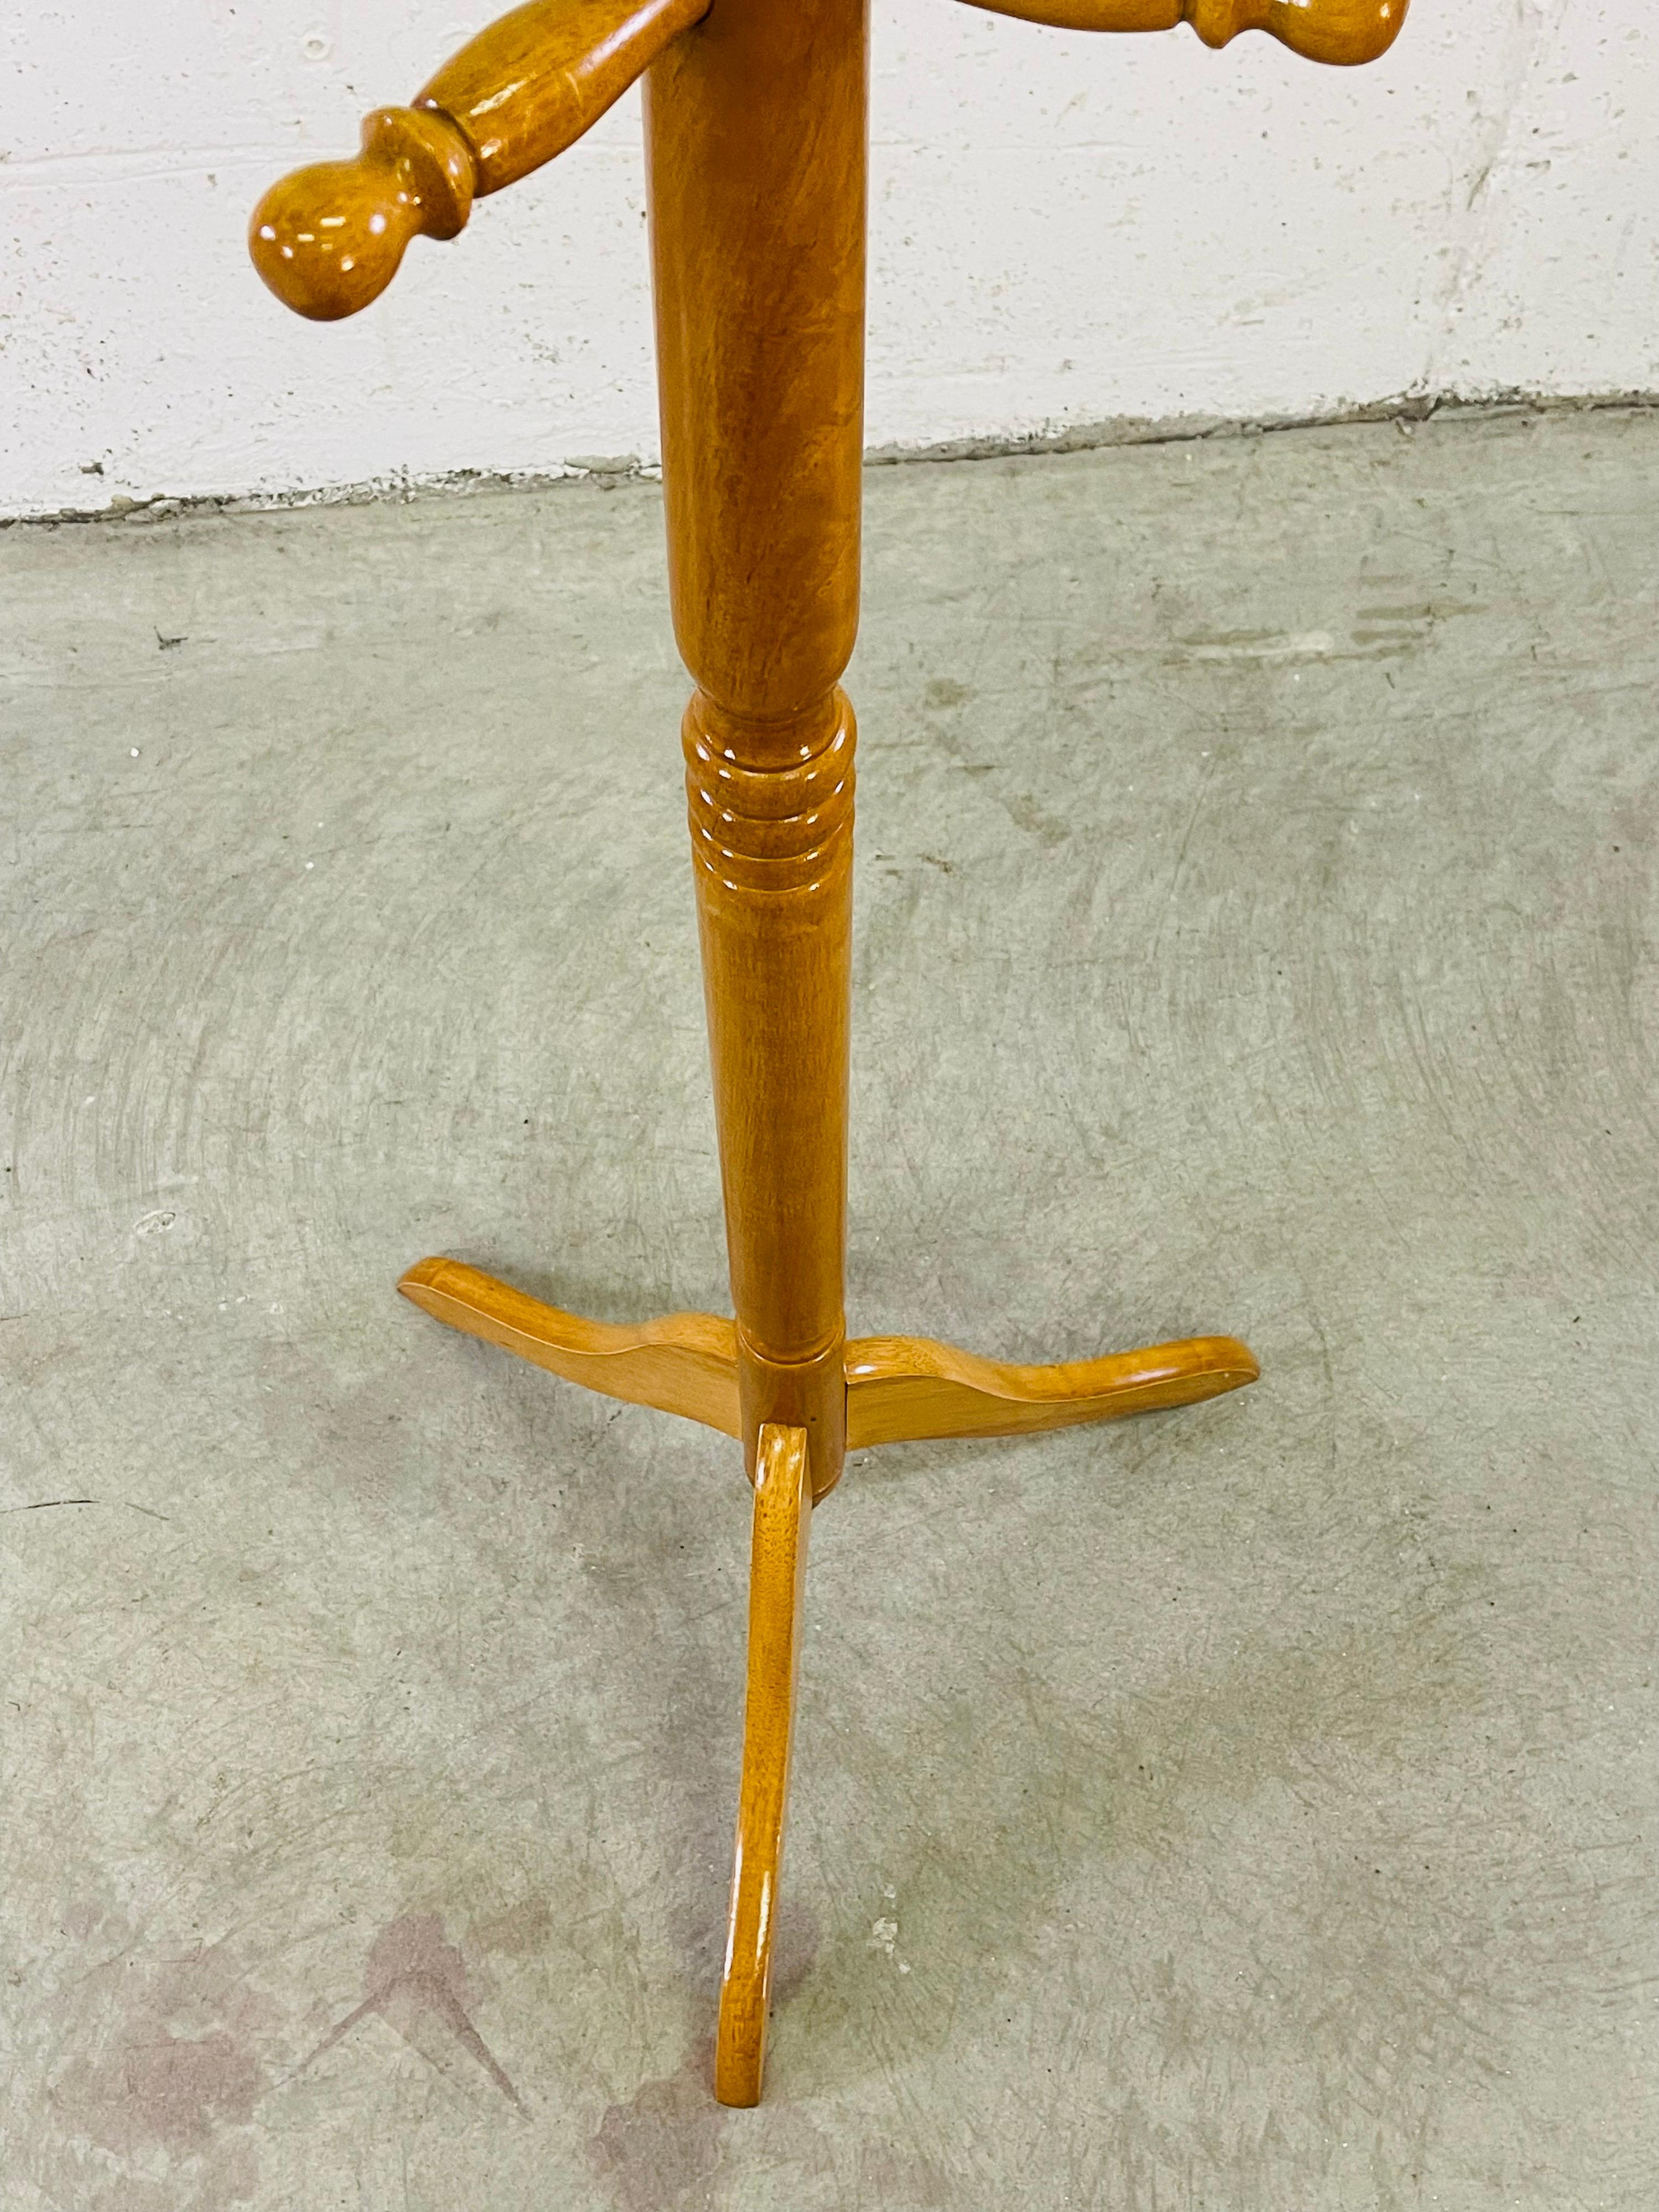 Tall Maple Wood Coat Rack In Good Condition For Sale In Amherst, NH